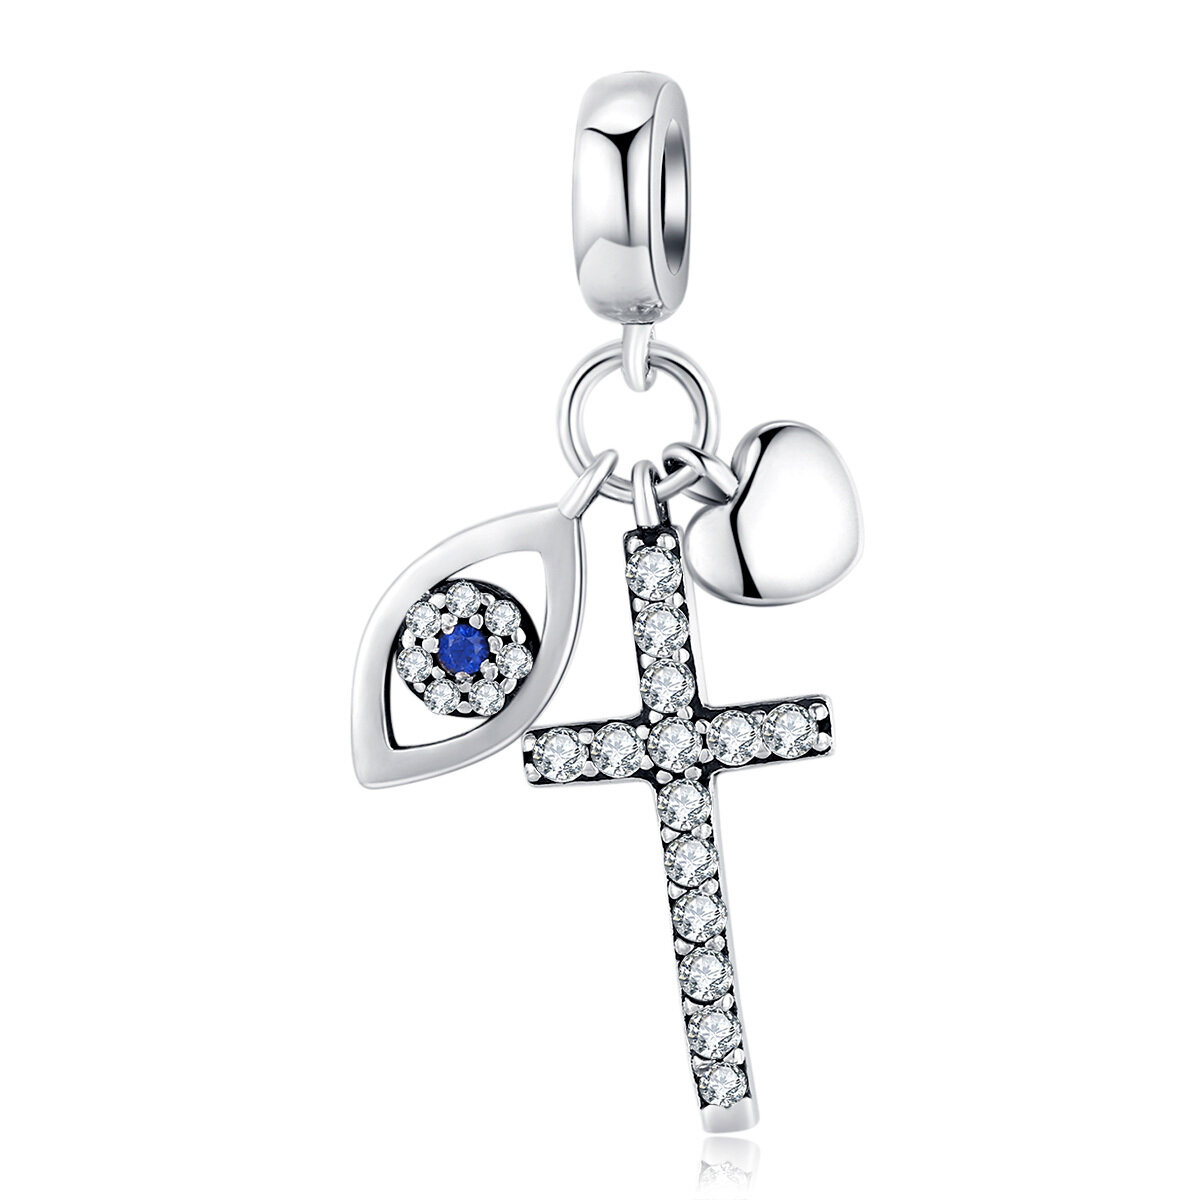 GemKing SCC1327 Guardian of Love S925 Sterling Silver Charm